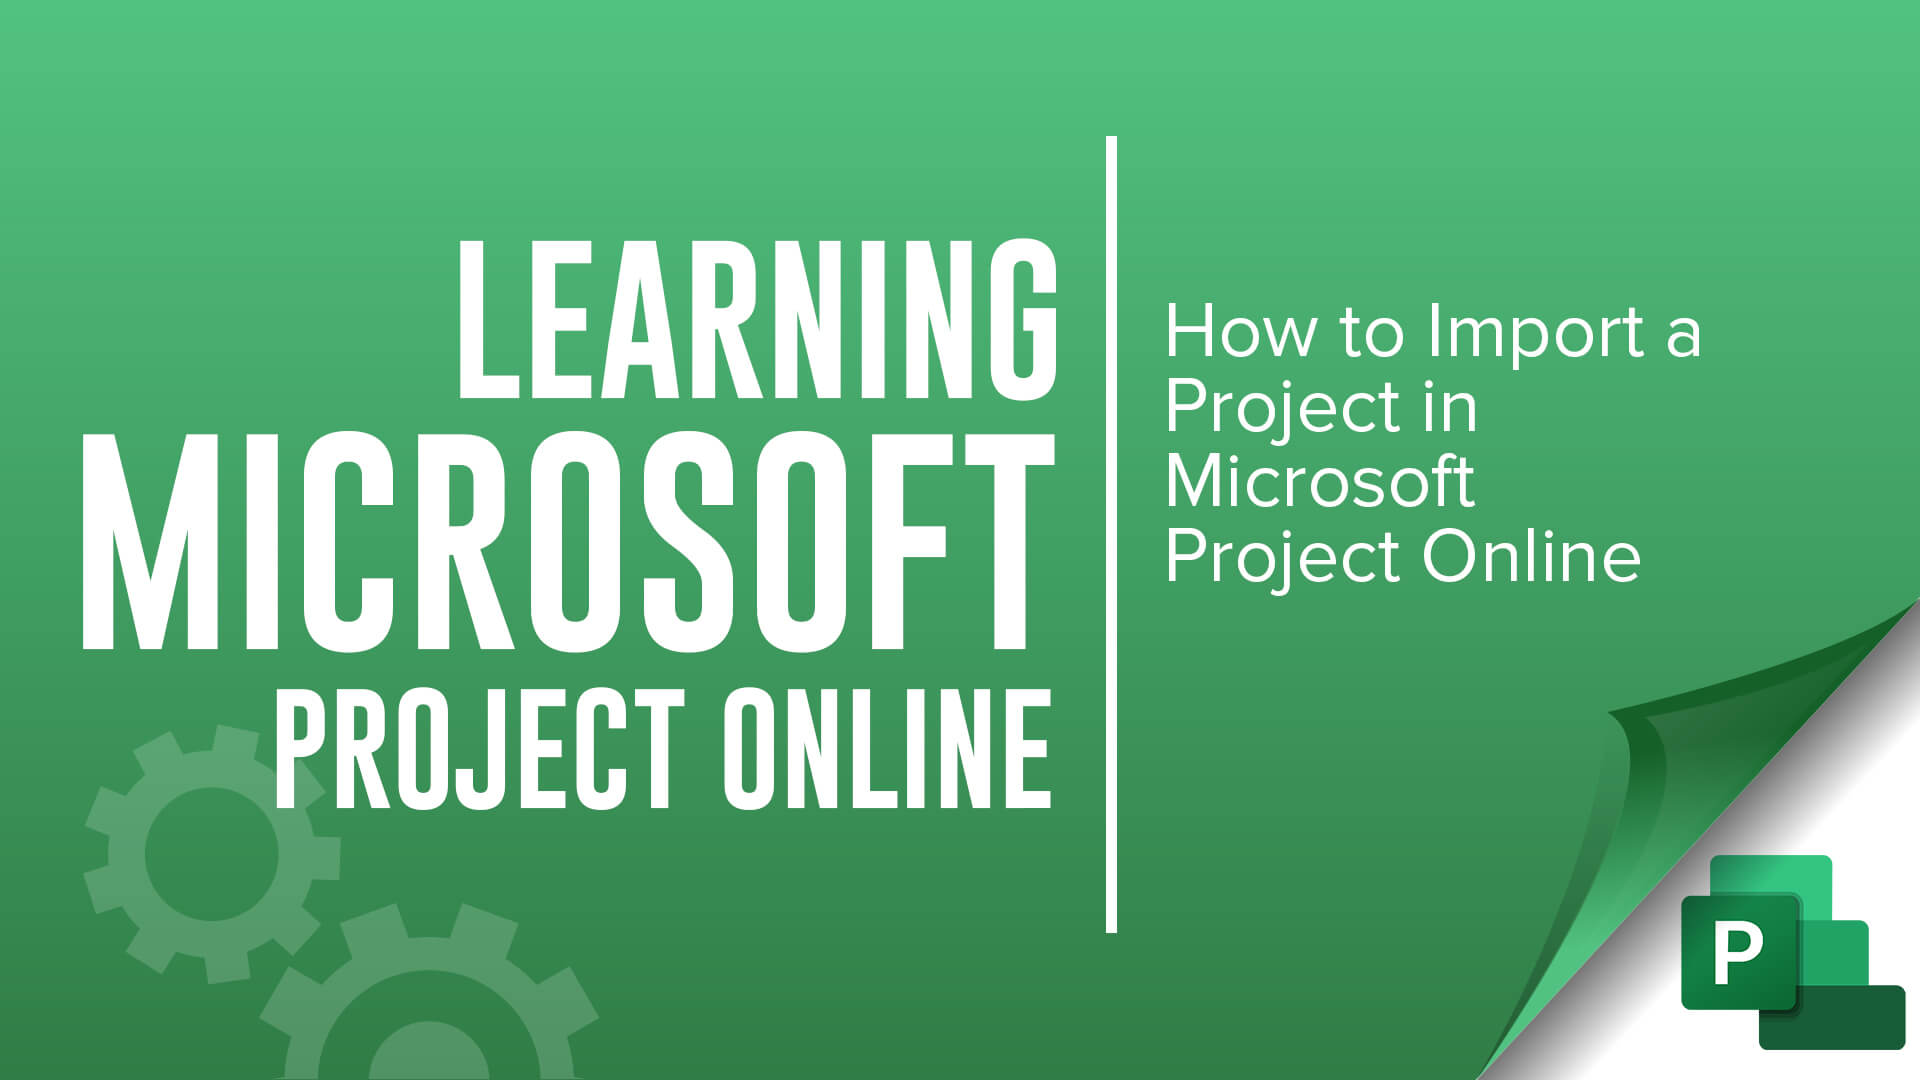 learning Microsoft Project Online - How to Import a Project in Microsoft Project Online